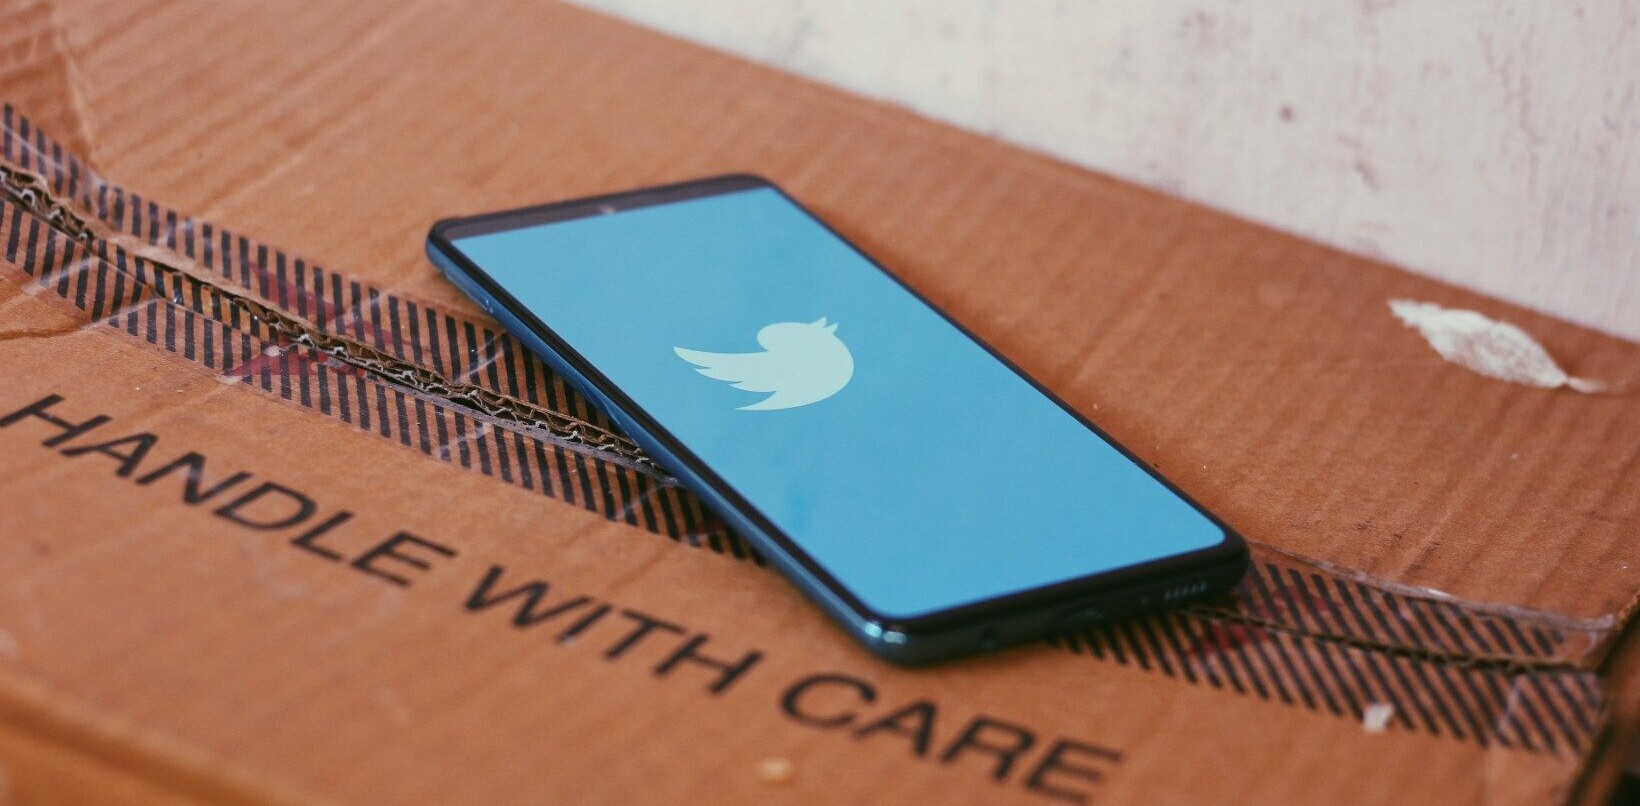 Twitter should build this feature to prevent accidental tweets from your company account